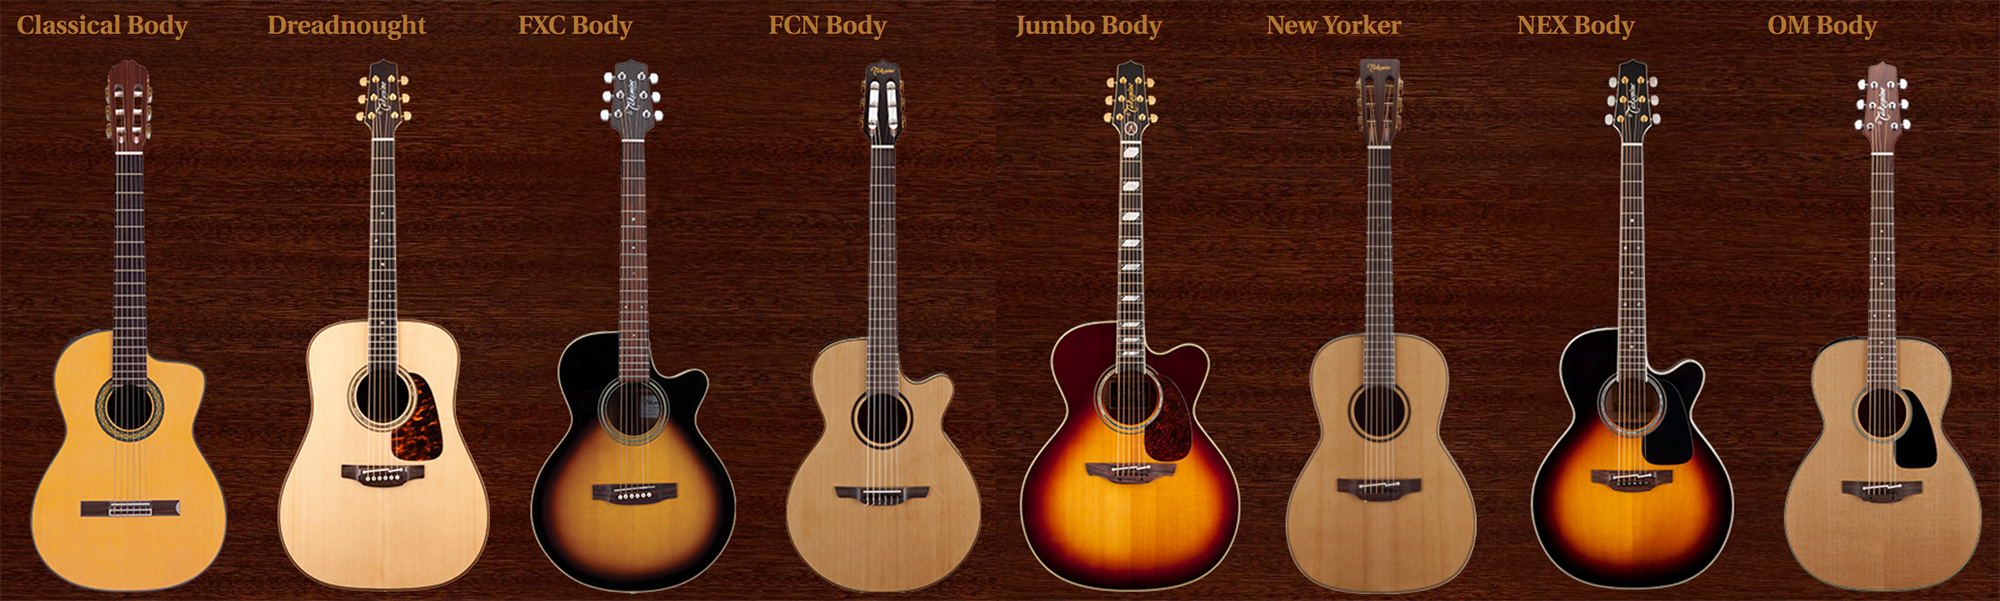 Takamine Gd71ce-nat Dreadnought Cw Epicea Palissandre - Natural Gloss - Guitarra electro acustica - Variation 5